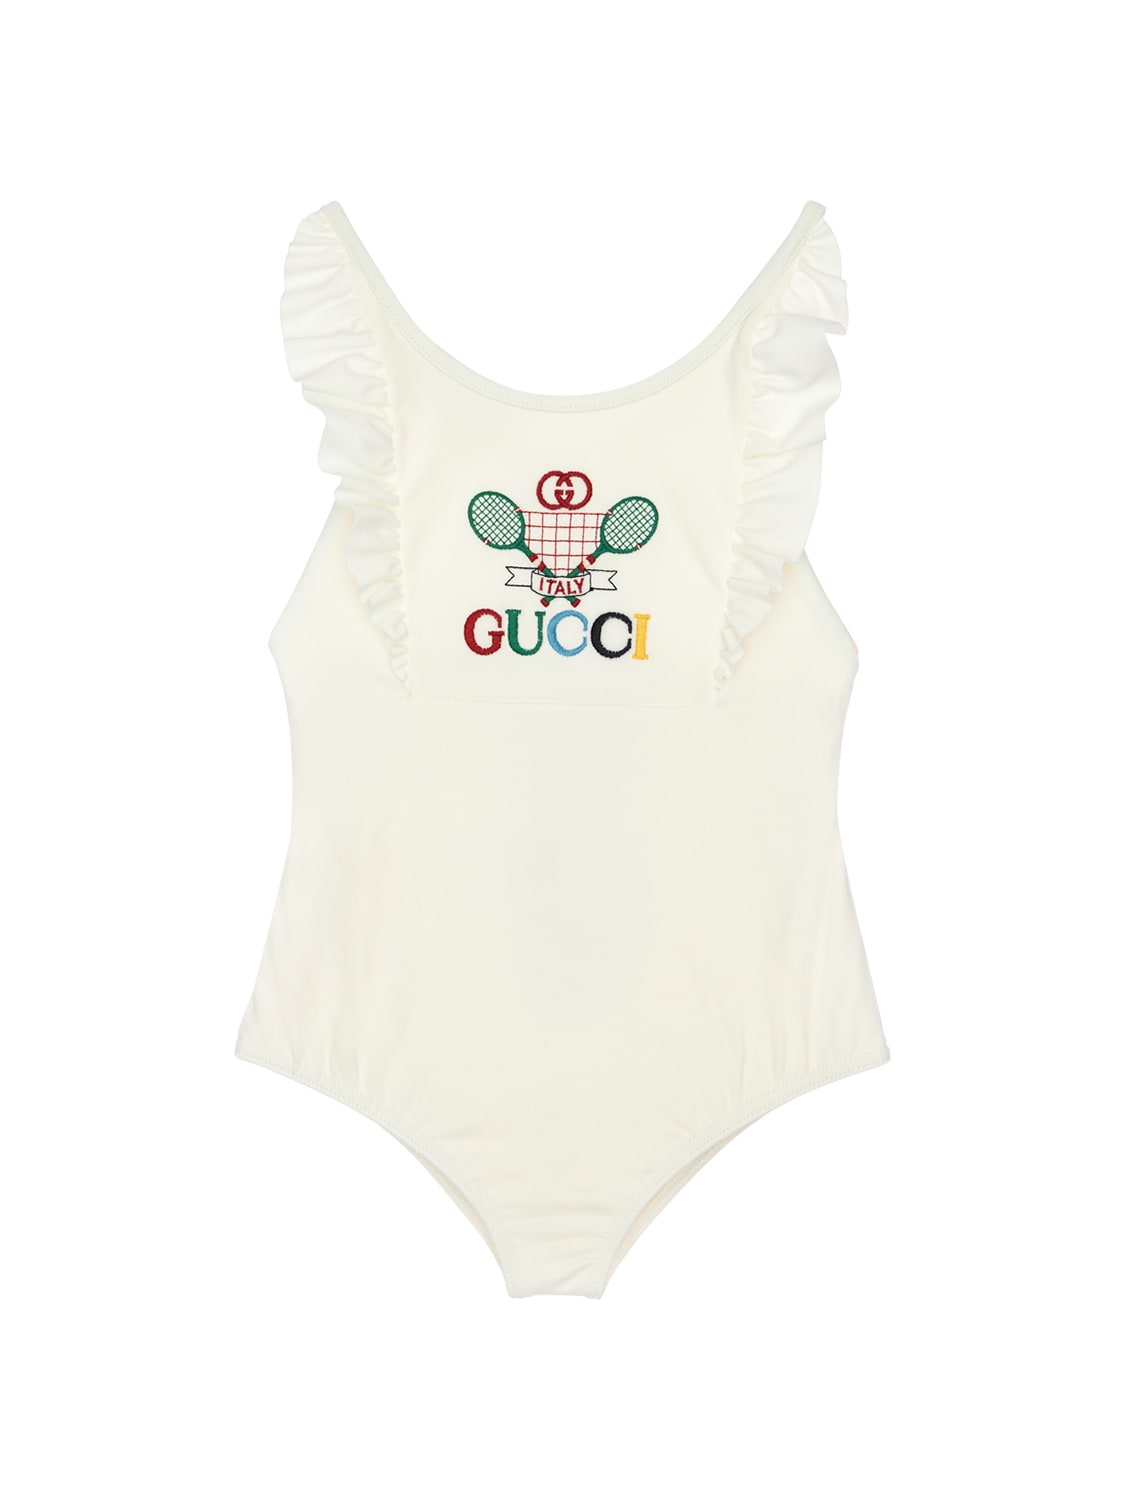 gucci bathing suit for kids